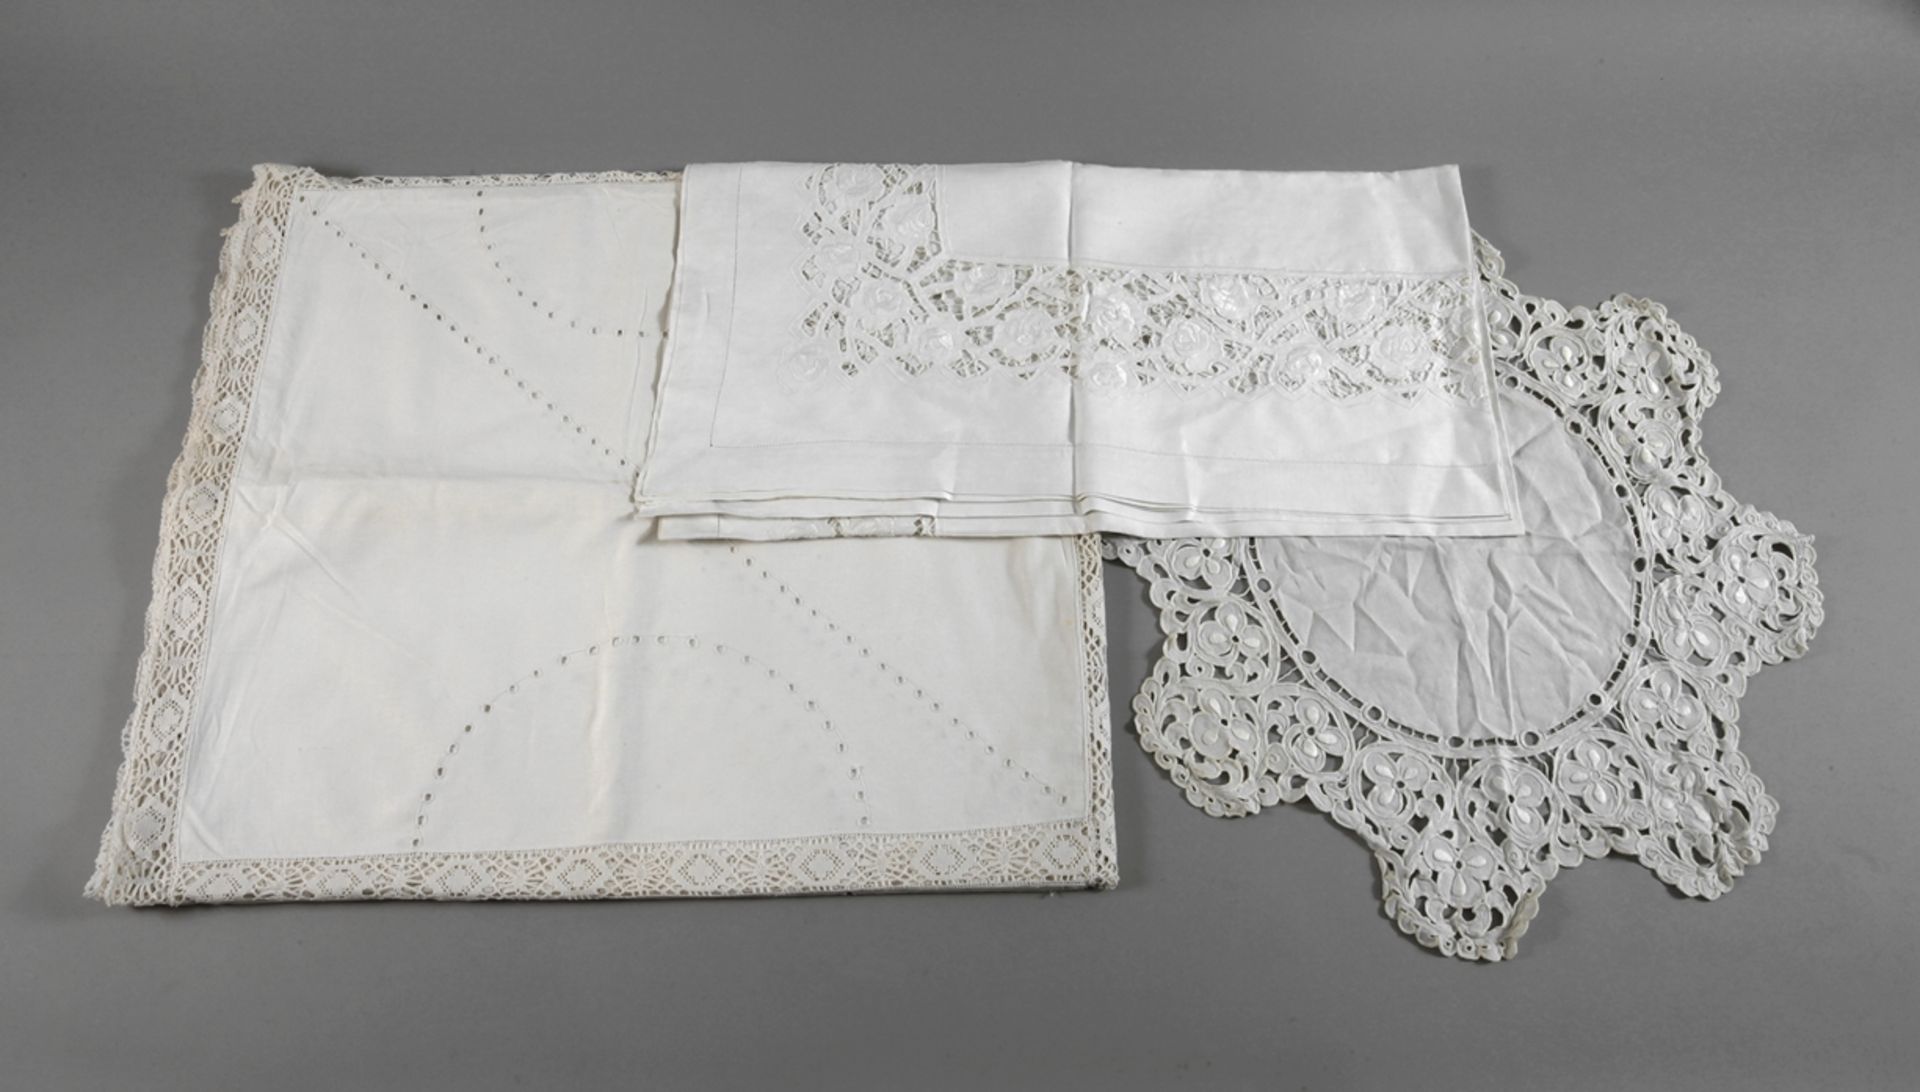 Three decorative blankets with white embroidery